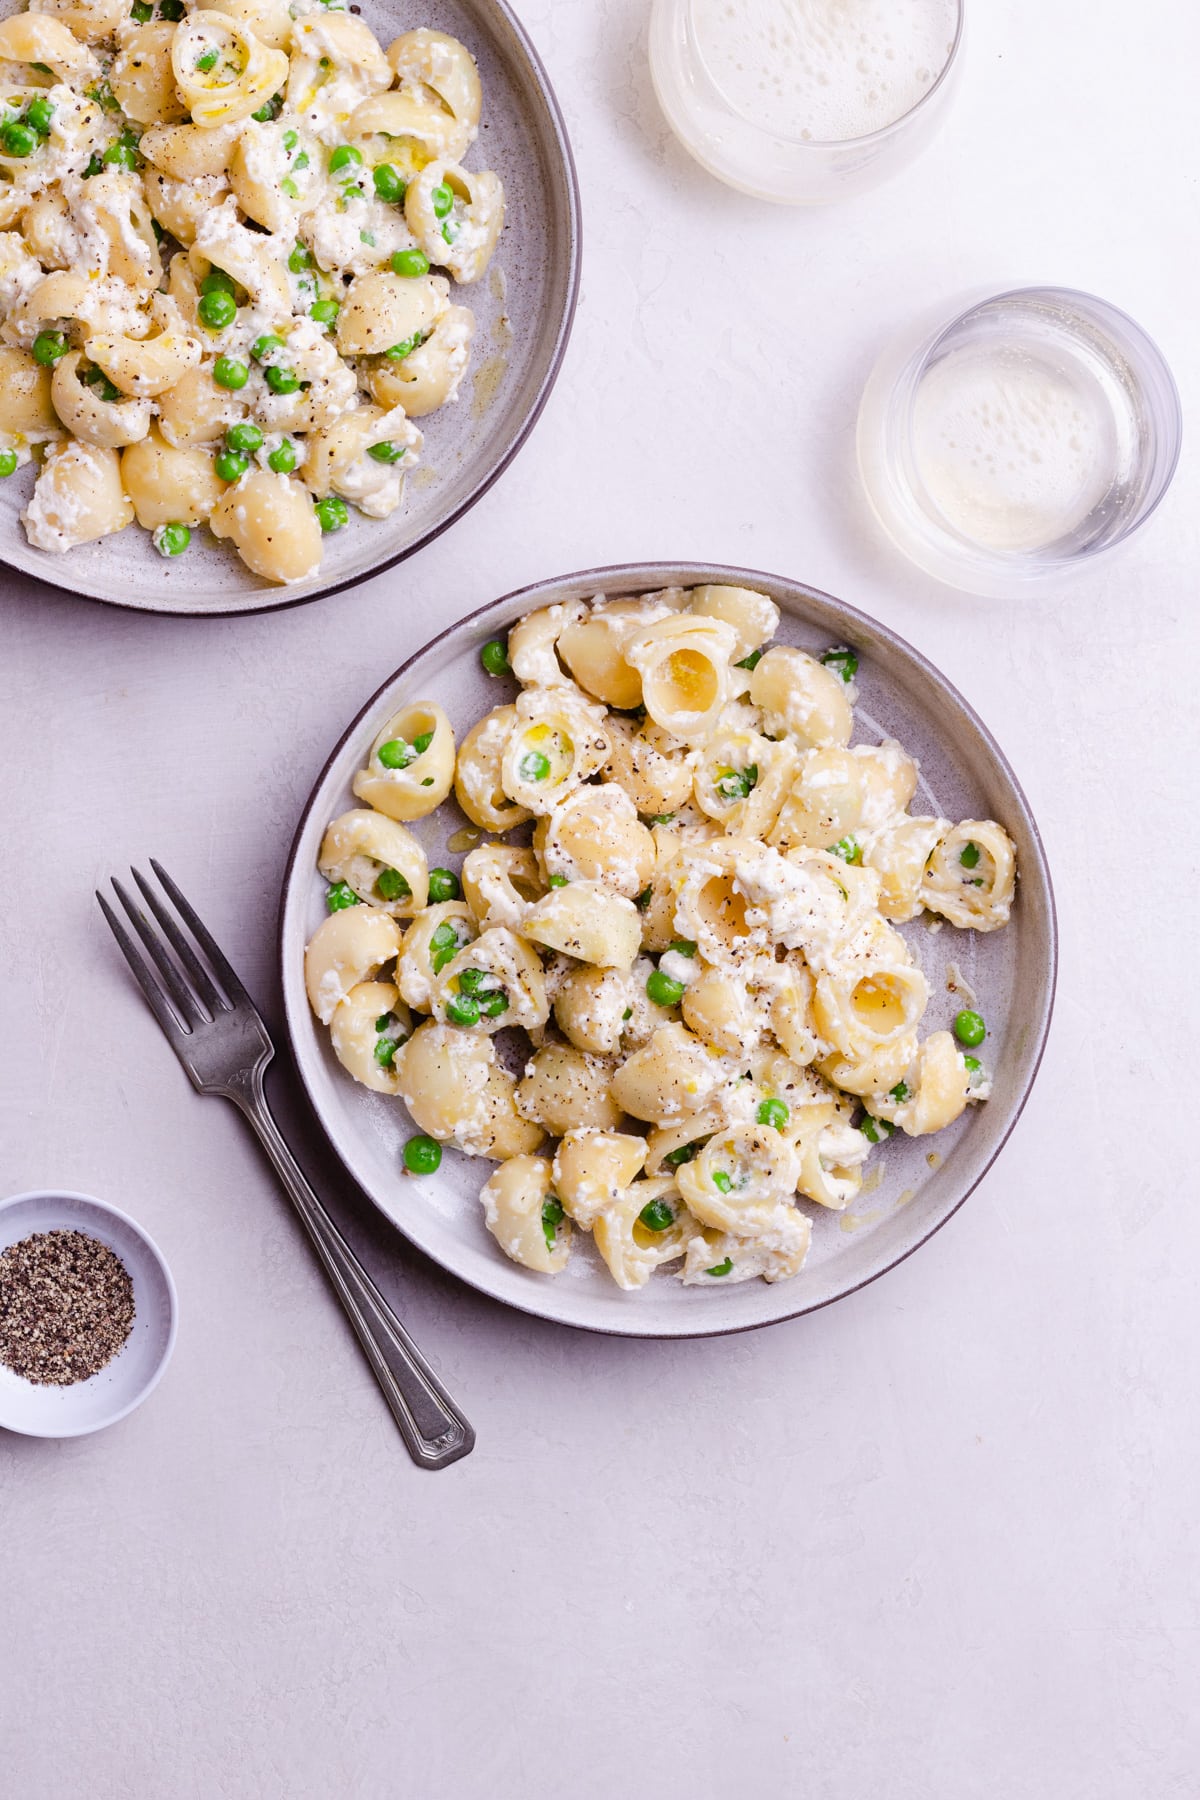 Overhead view of two bowls of pasta with ricotta and peas topped with olive oil and black pepper.